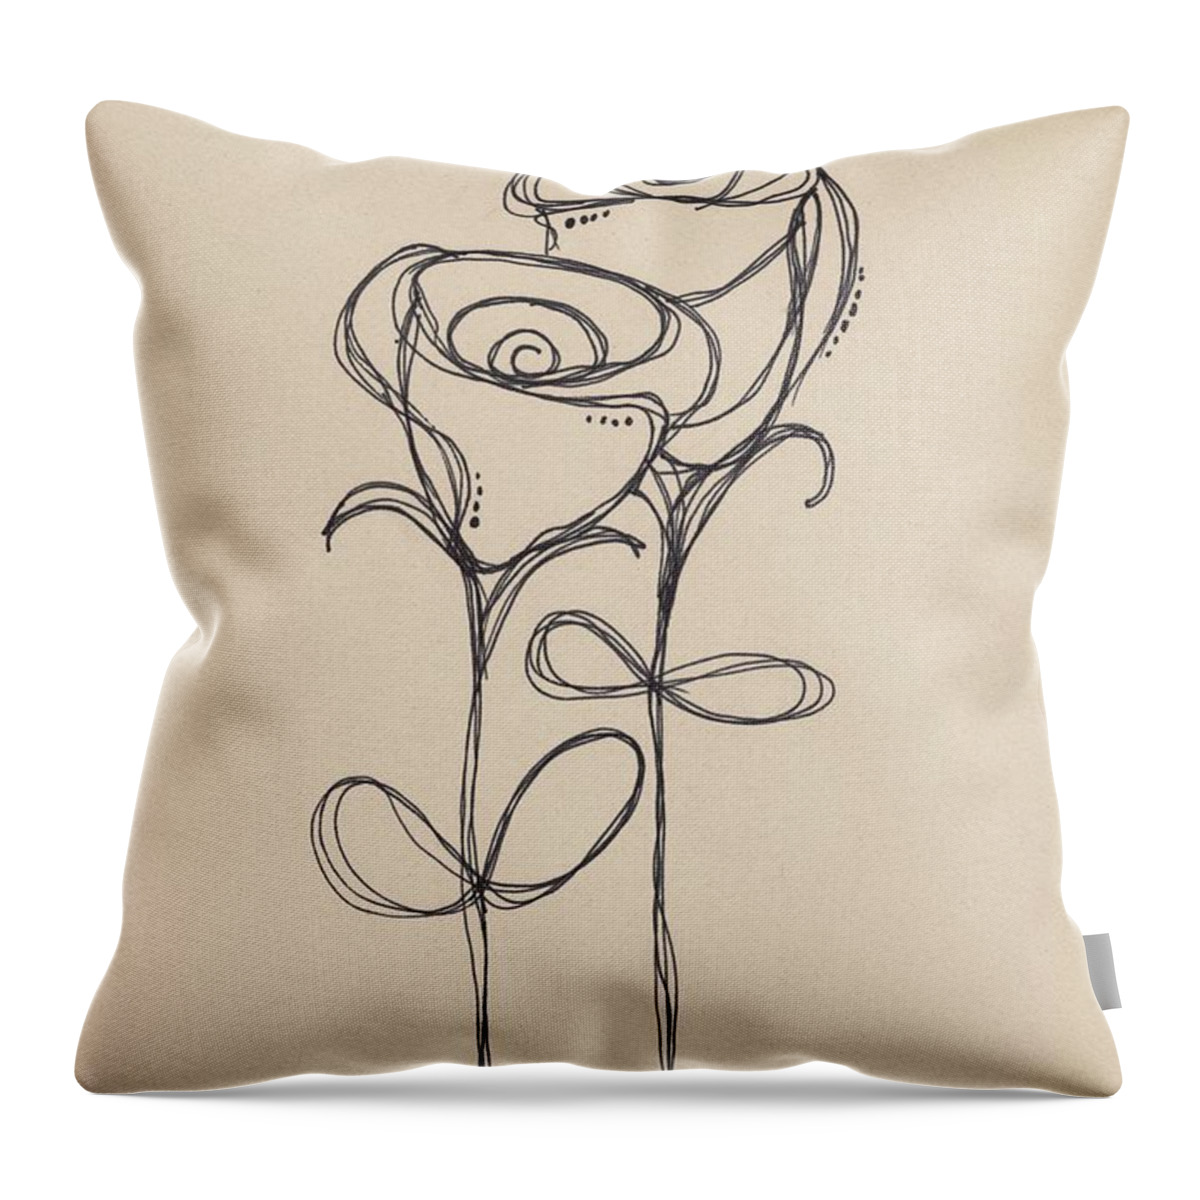 Roses Throw Pillow featuring the drawing Doodle roses by Alena Nikifarava